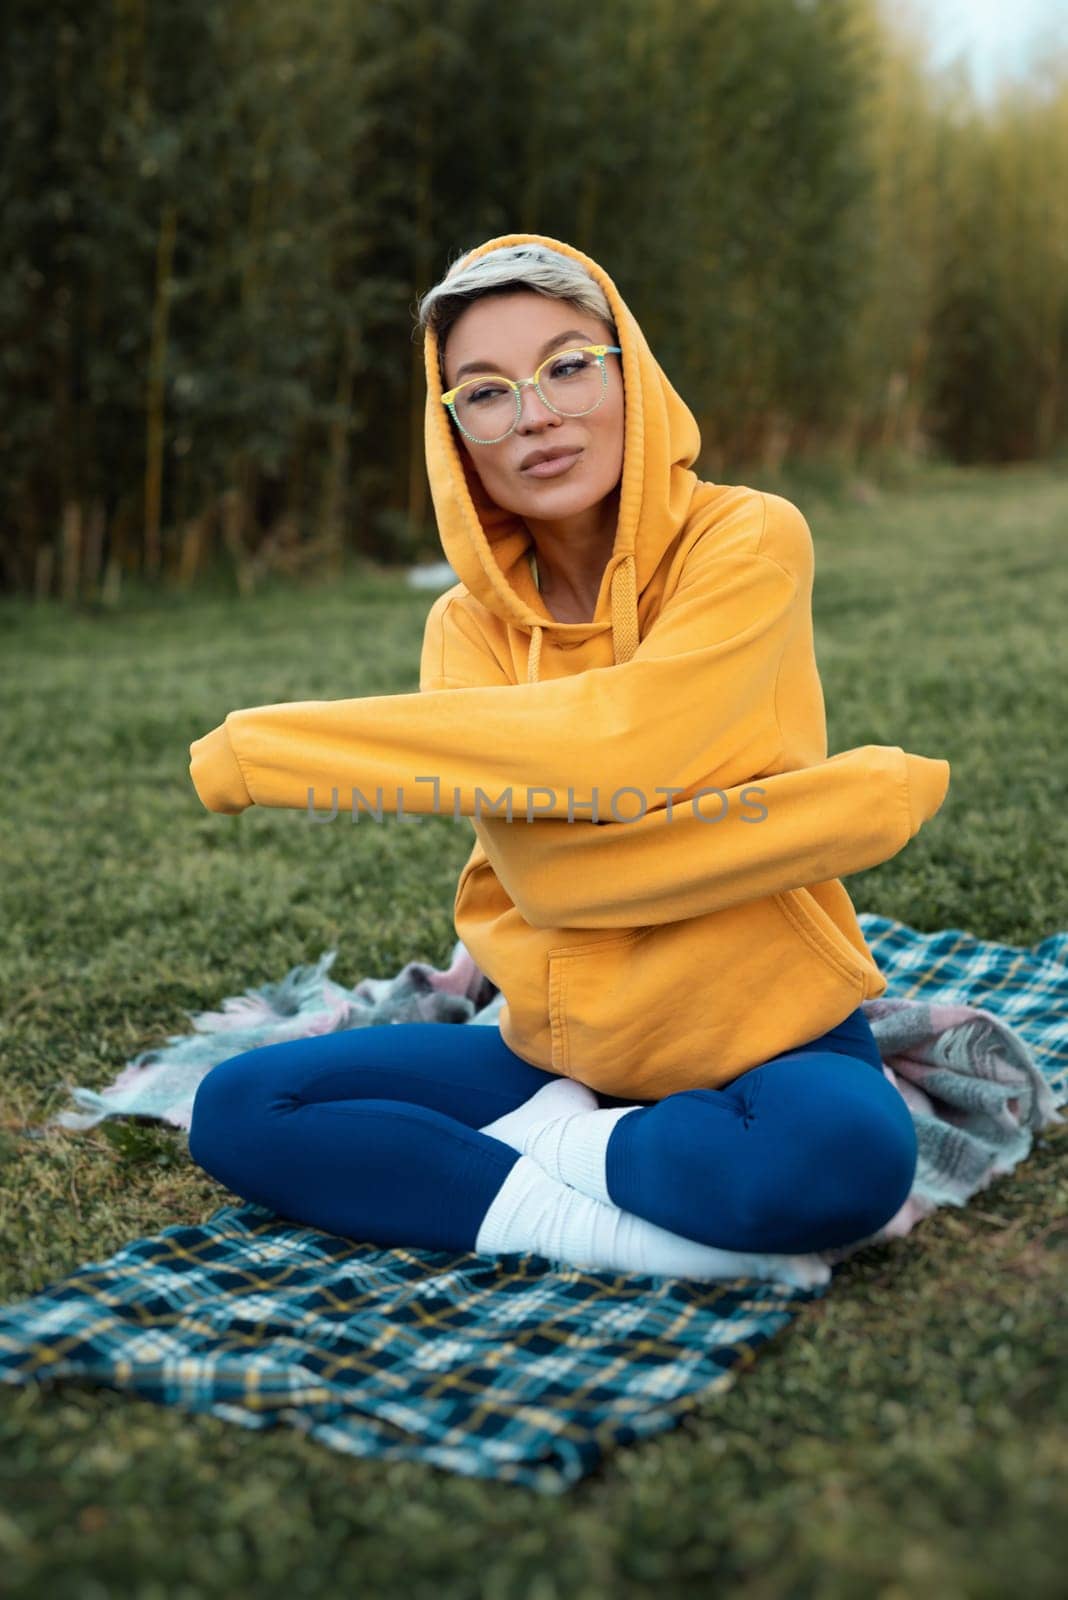 A cute girl with glasses in an orange hoodie is sitting in a park in nature expressing kind emotions